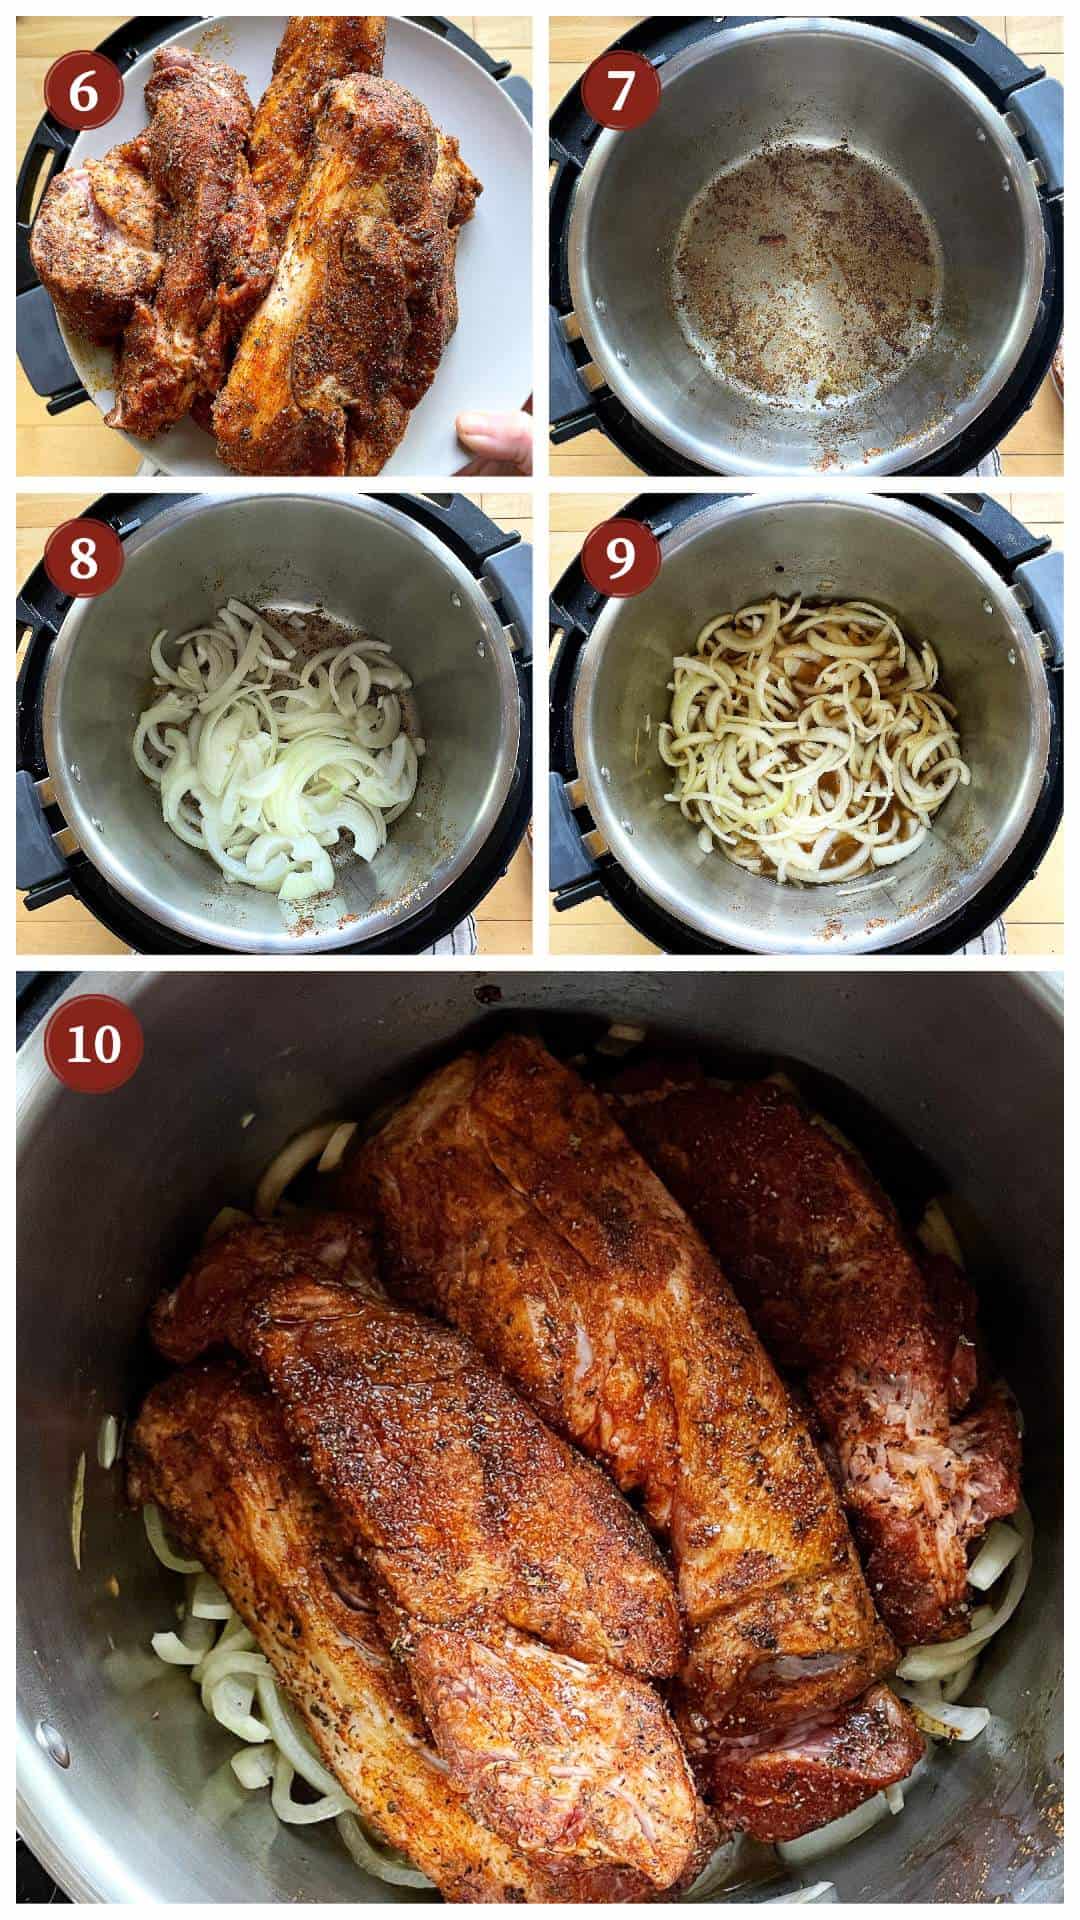 A collage of images showing how to make country style ribs in an Instant Pot, steps 6 - 10.